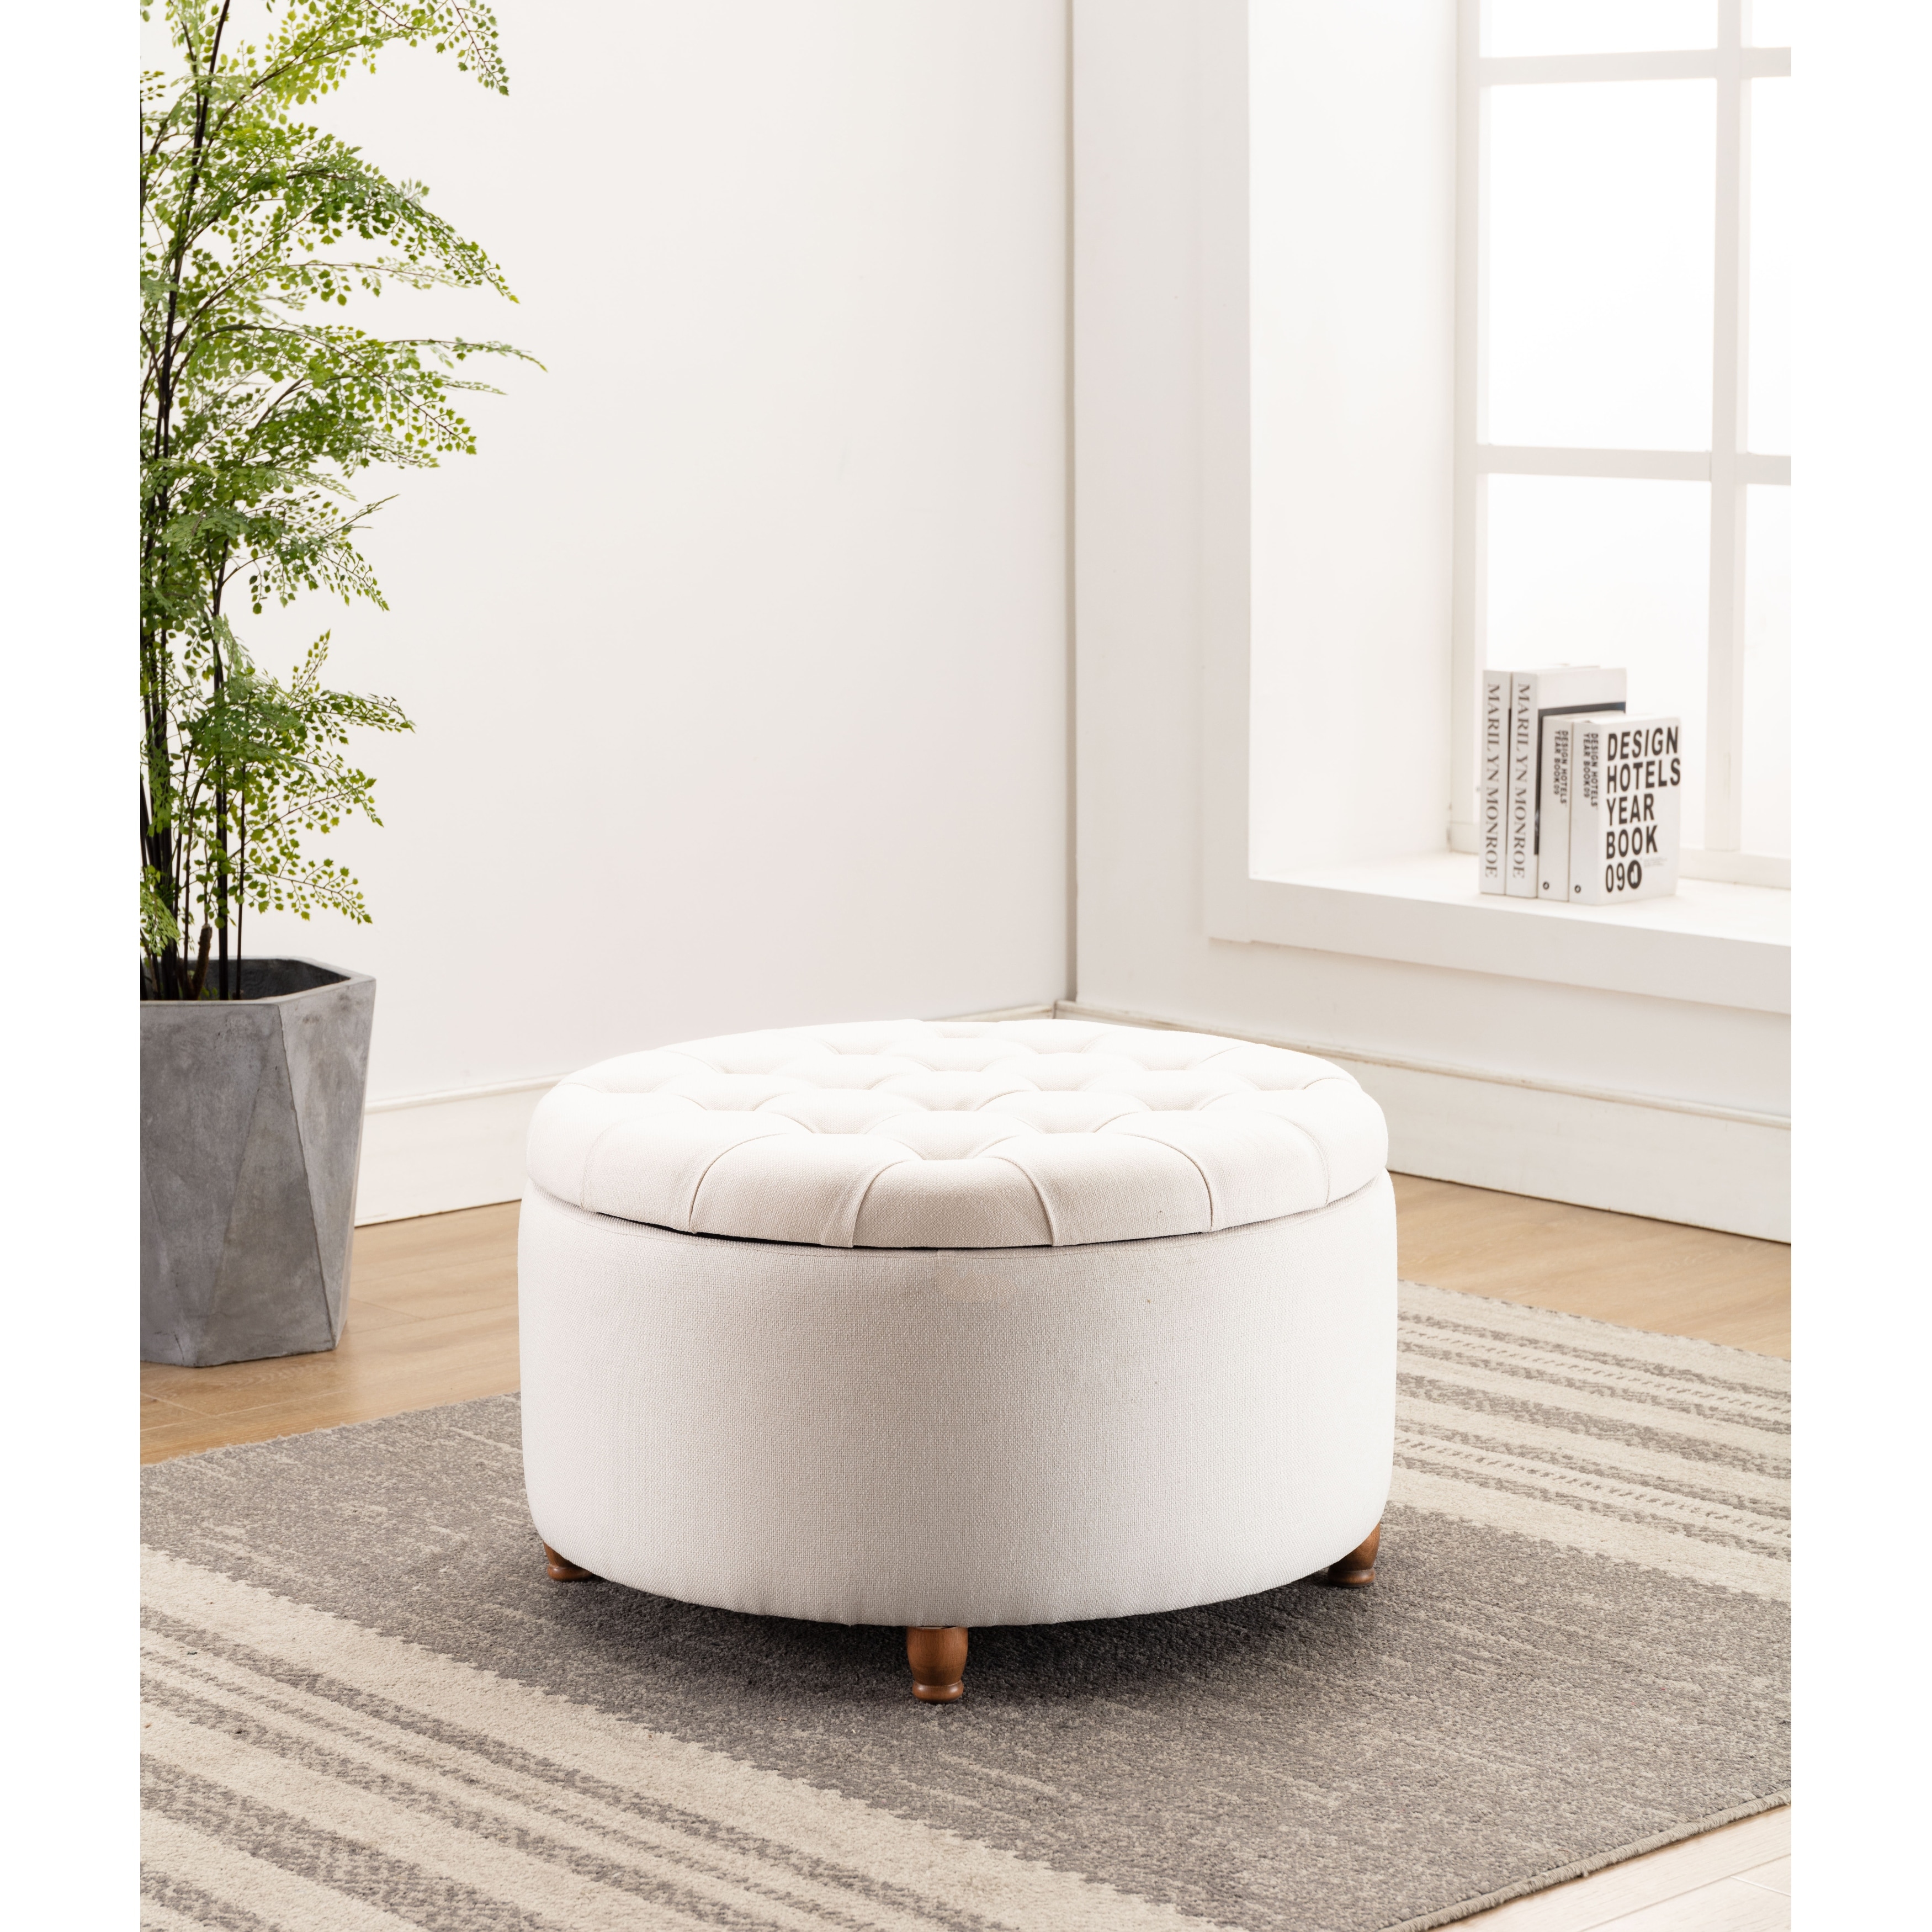 WOVENBYRD Large Round Pintucked Storage Ottoman, Lift off lid